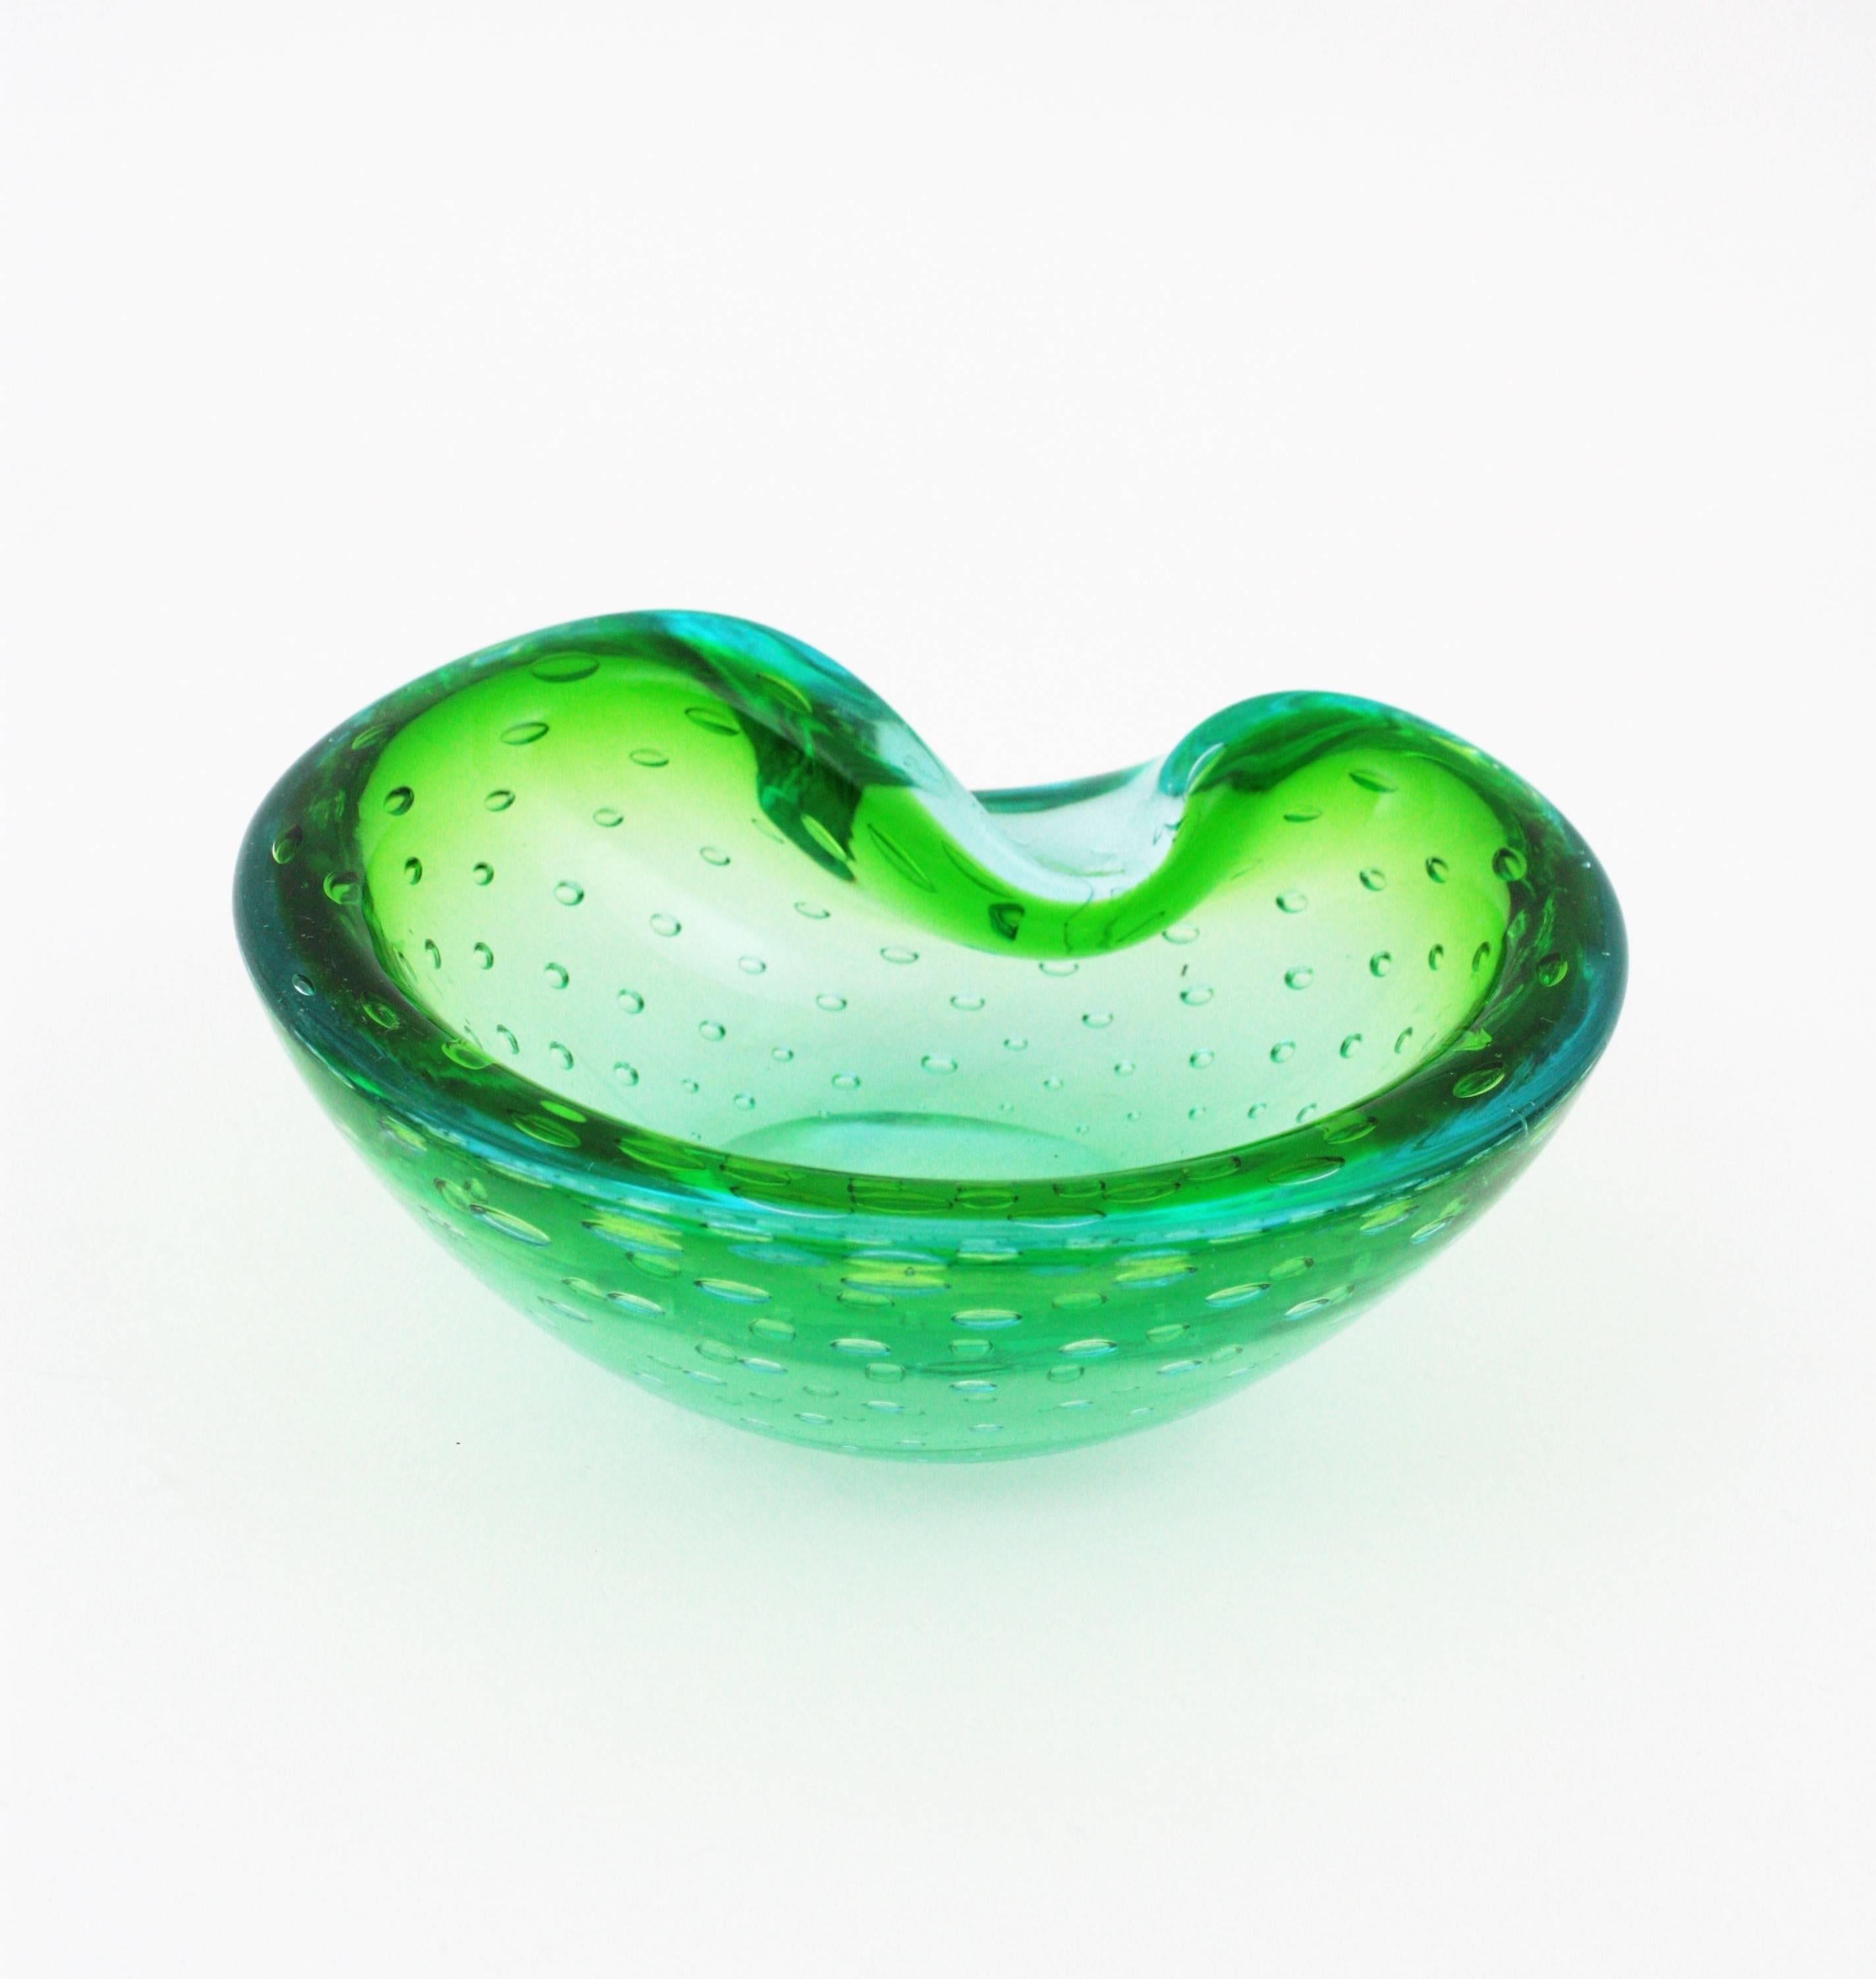 Organic shaped Murano glass bowl or ashtray in lime green and blue with controlled air bubbles. Italy, 1960s.
This art glass hand blown Murano bowl has shades of lime green and turquoise blue edge and hundreds of controlled bubbles.
Attributed to